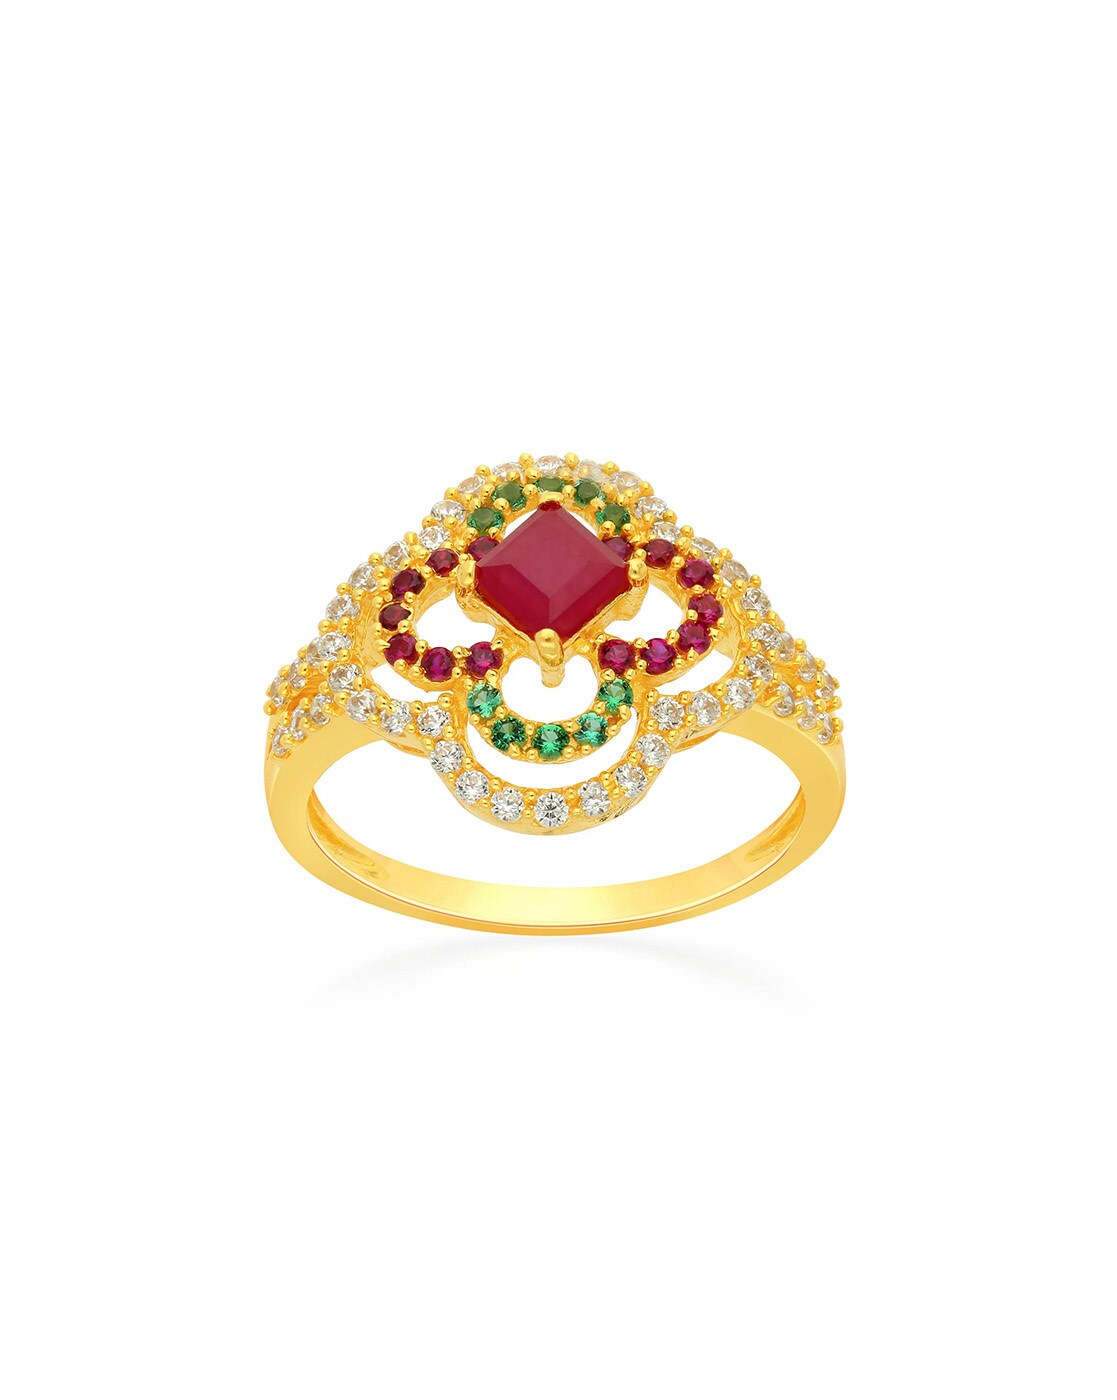 22kt Gold Ruby Ring - RiLp4575 - 22kt gold fancy Ruby studded ring with  excellent workmanship. Note : Ring can be resized by reque